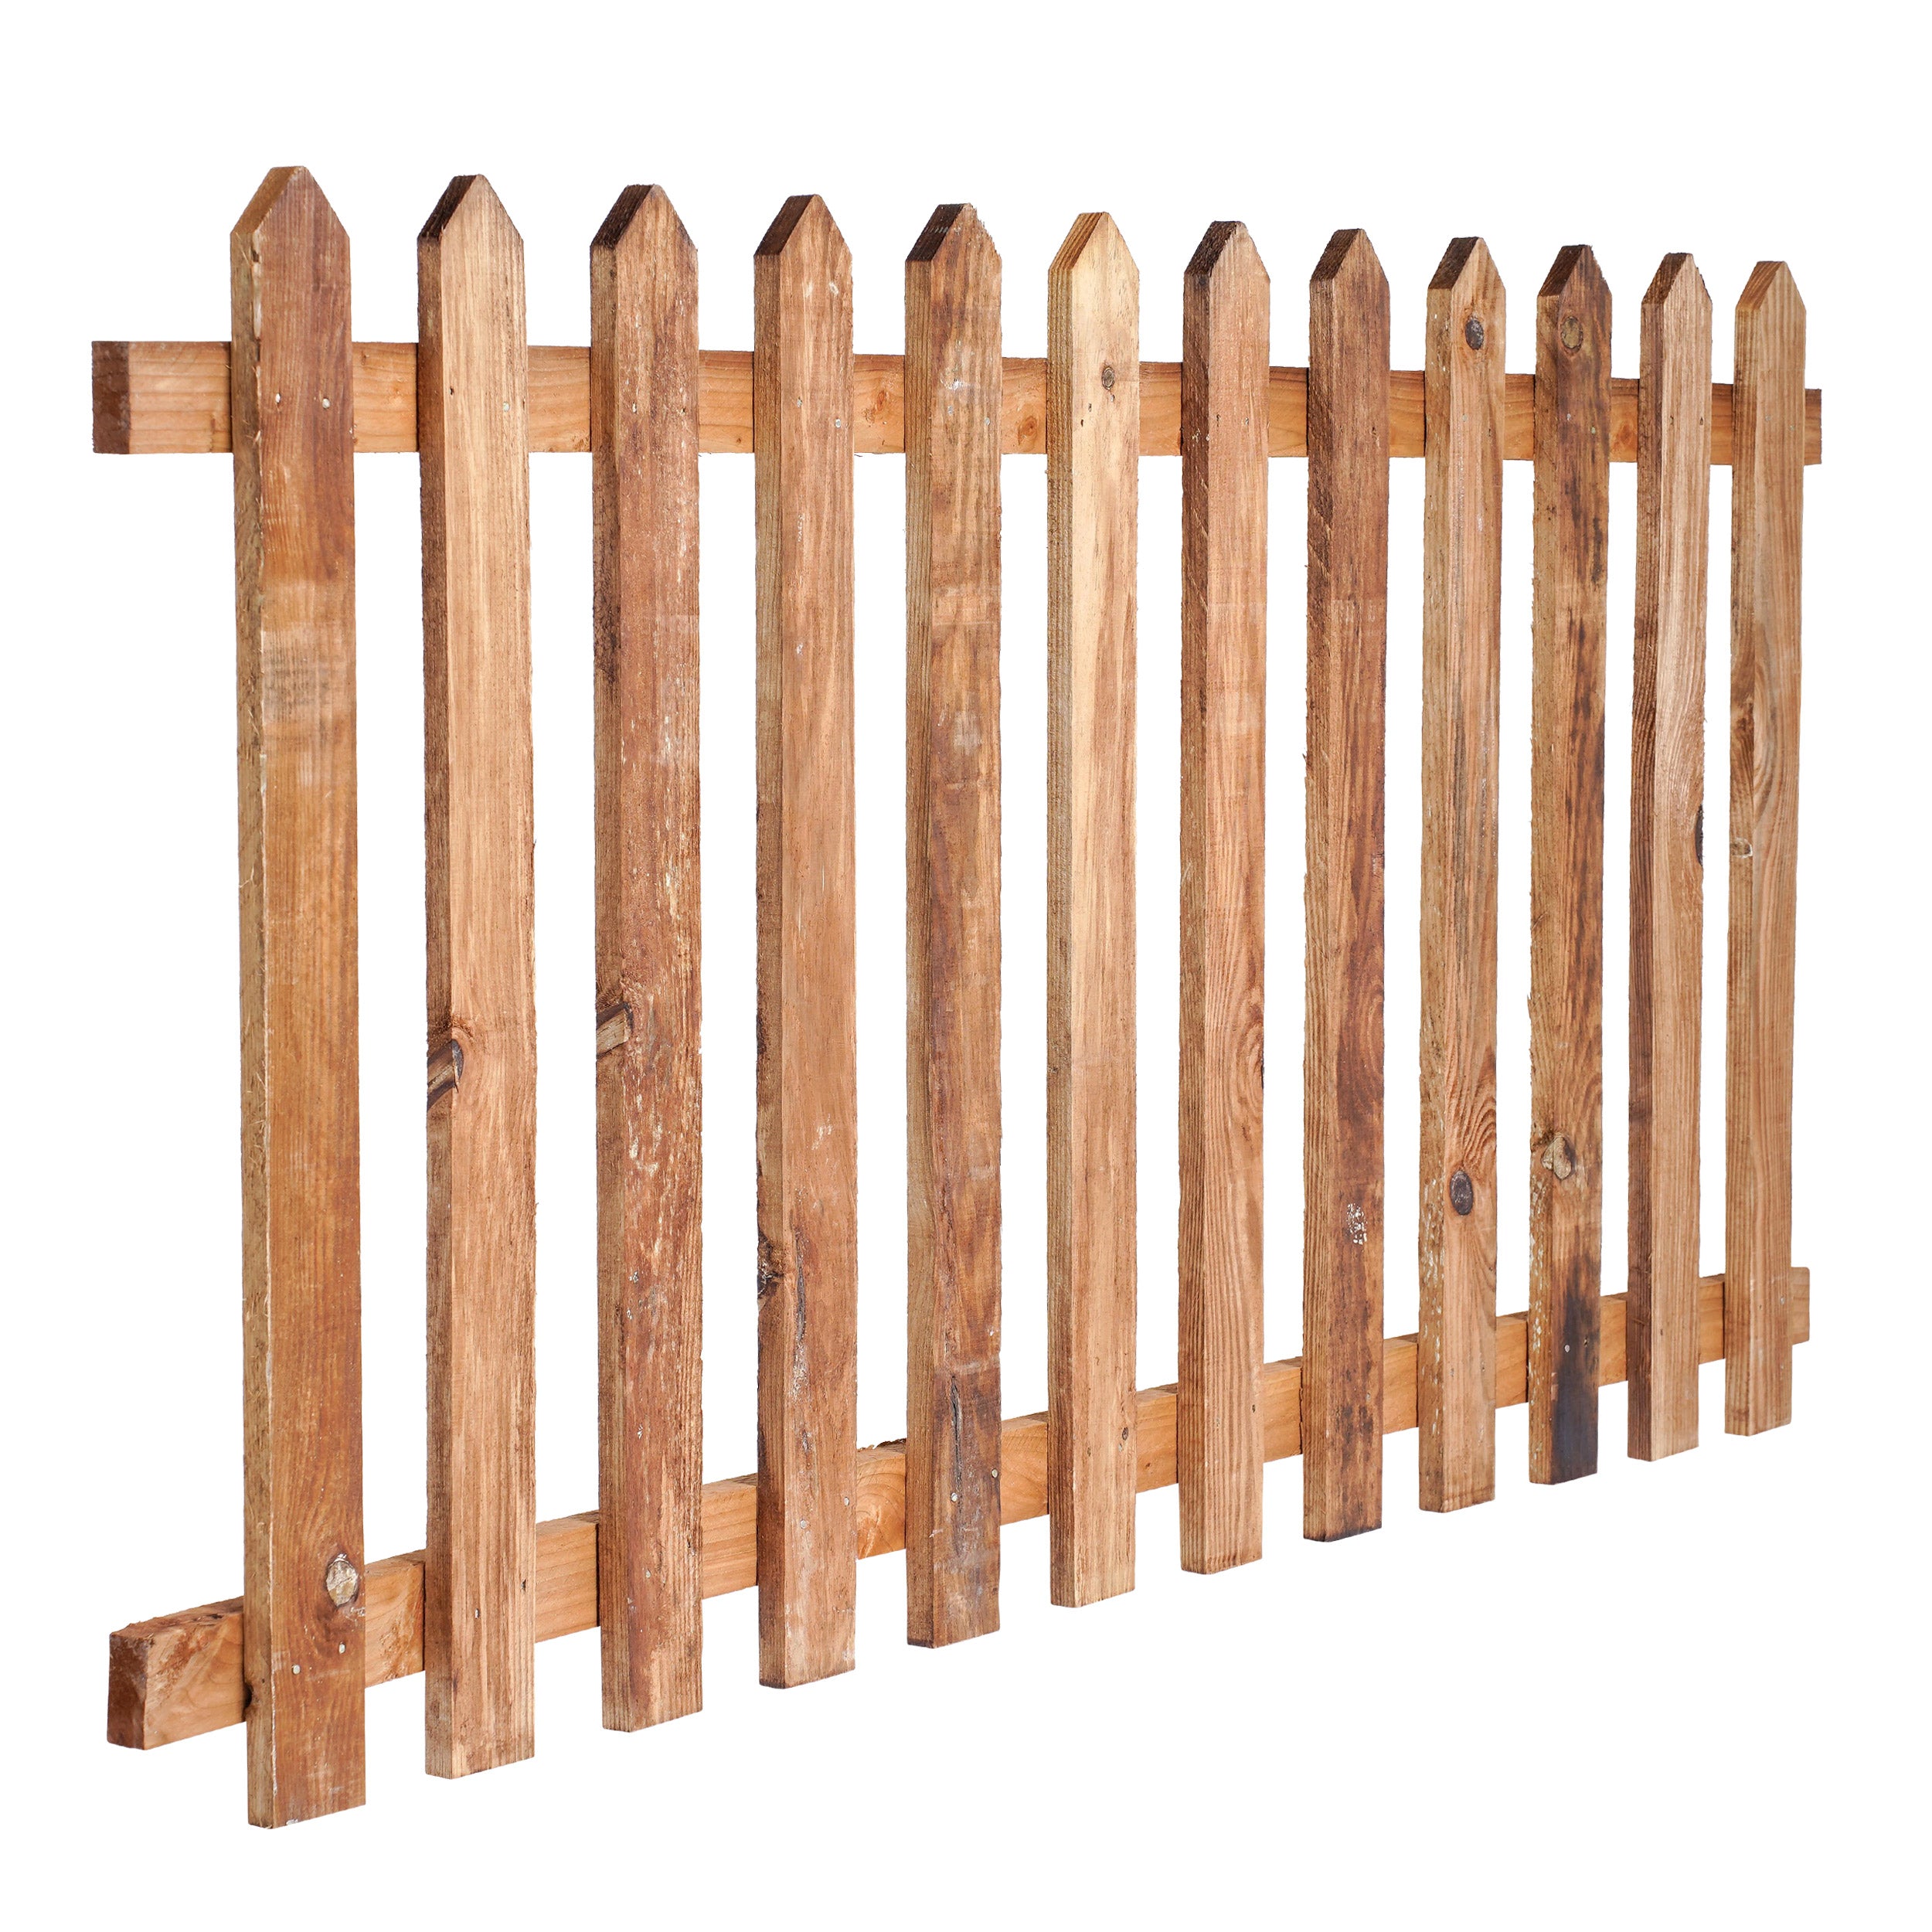 30 degree angle of 6ft x 3ft Picket Fence Panel Point Top - Pressure Treated Brown